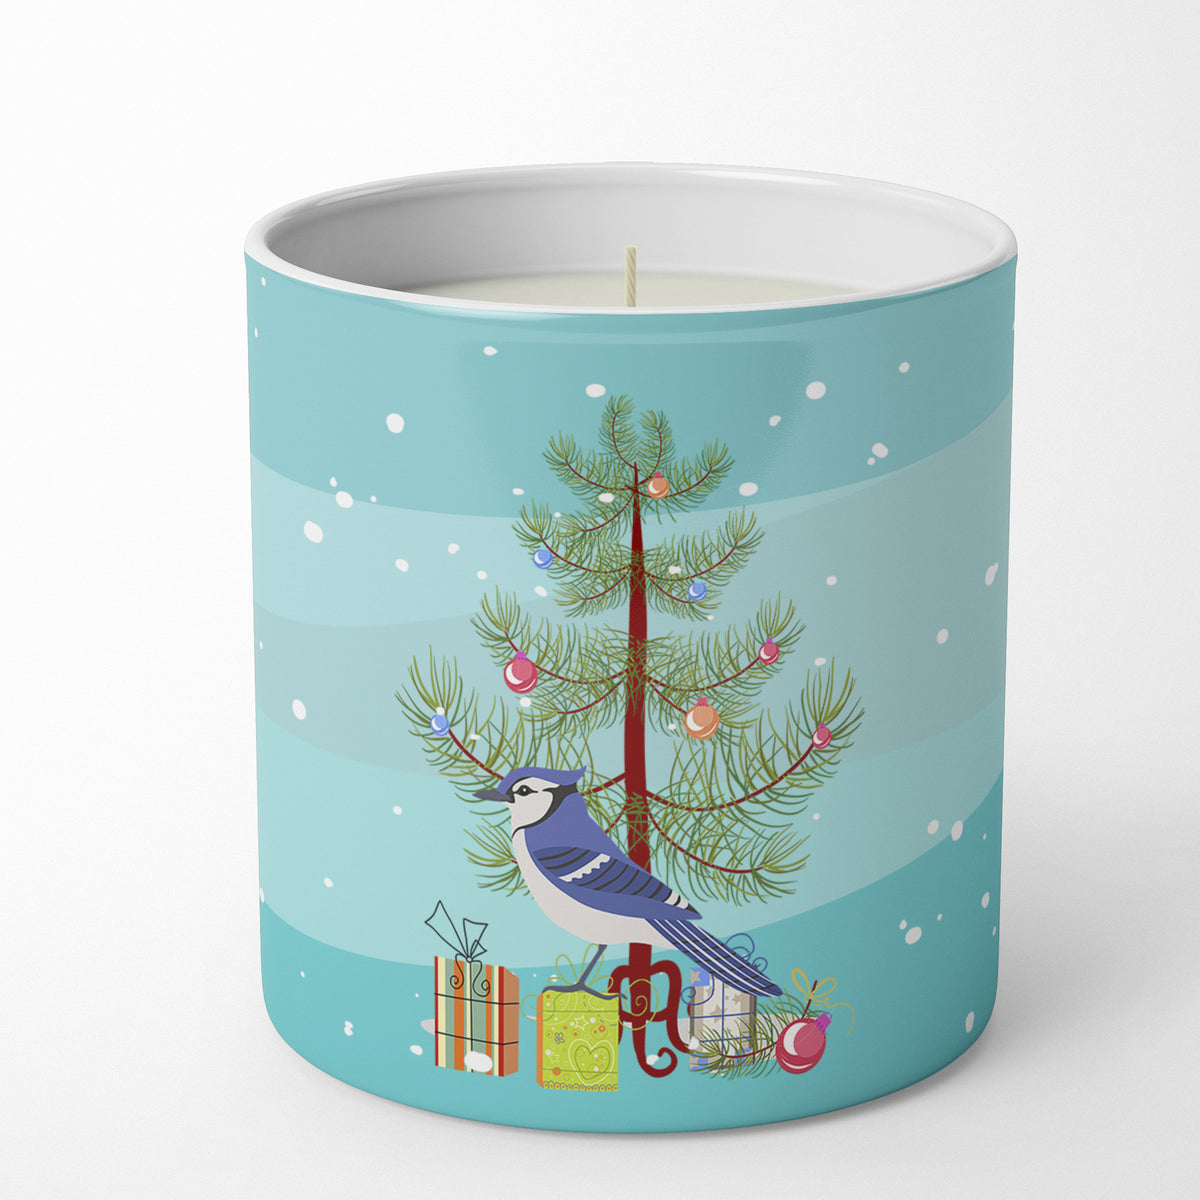 Buy this Jay Bird Merry Christmas 10 oz Decorative Soy Candle